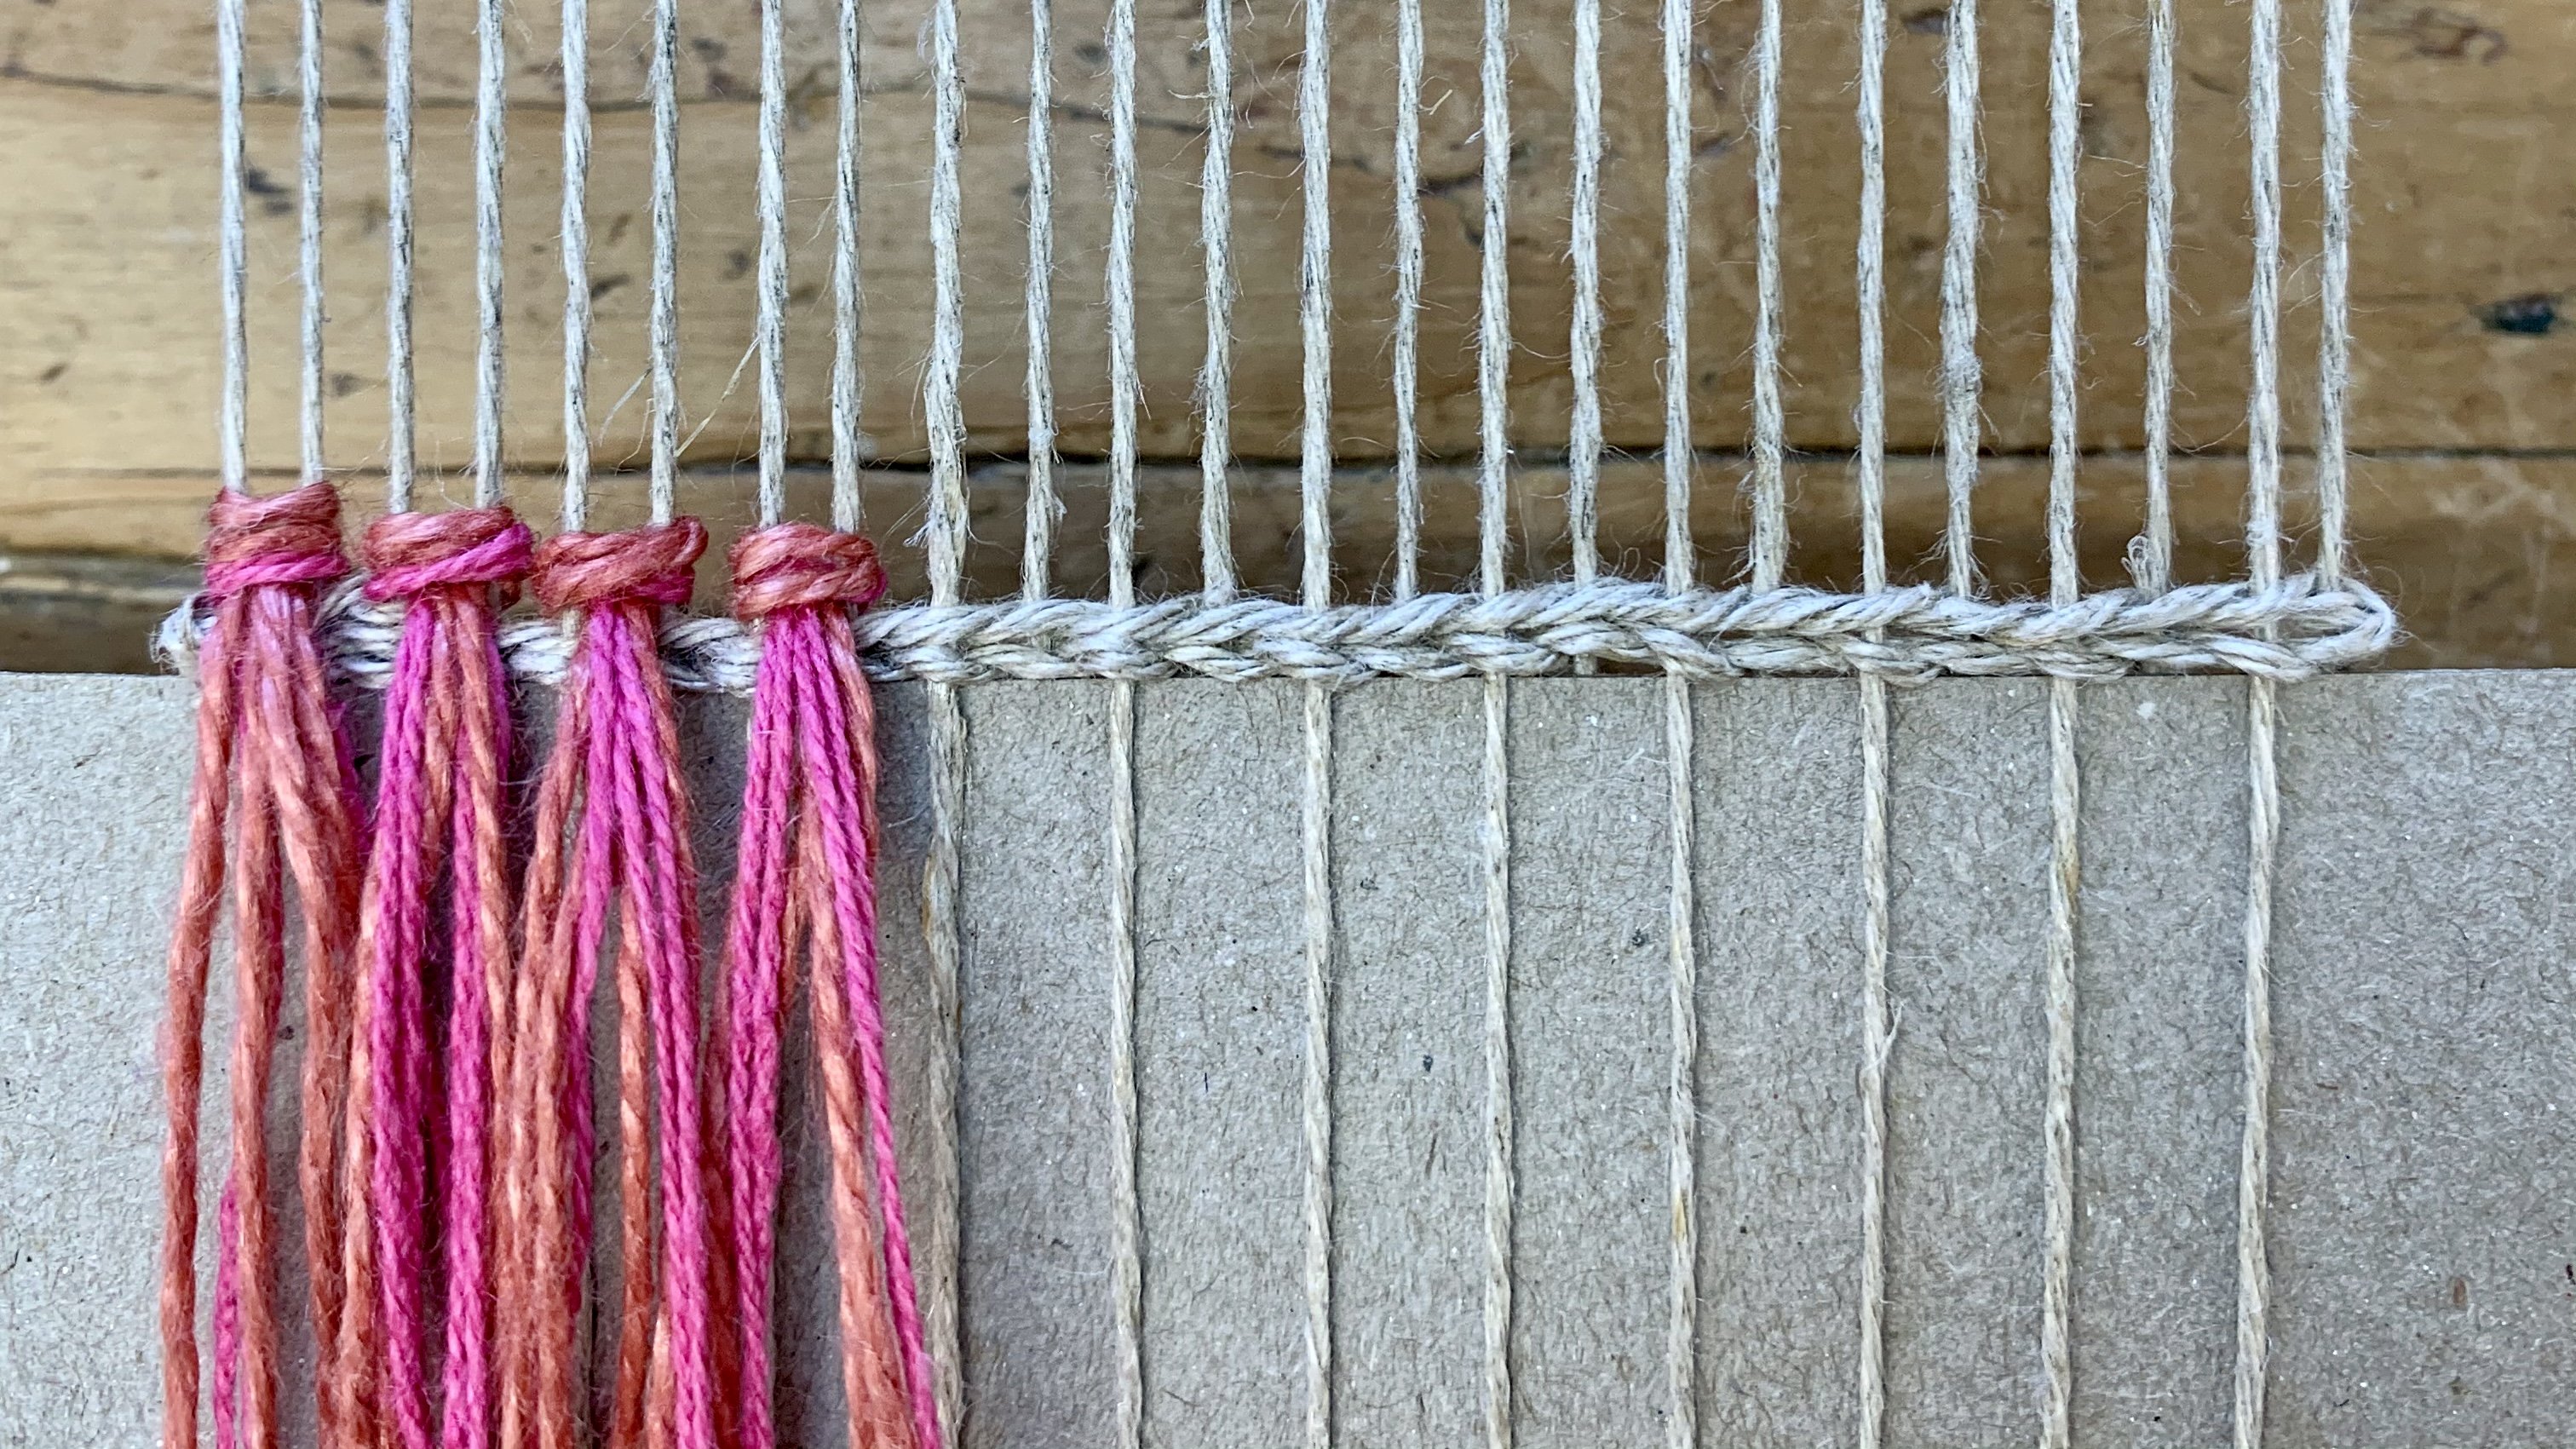 Introduction to Frame Loom Weaving - A Beginners Guide